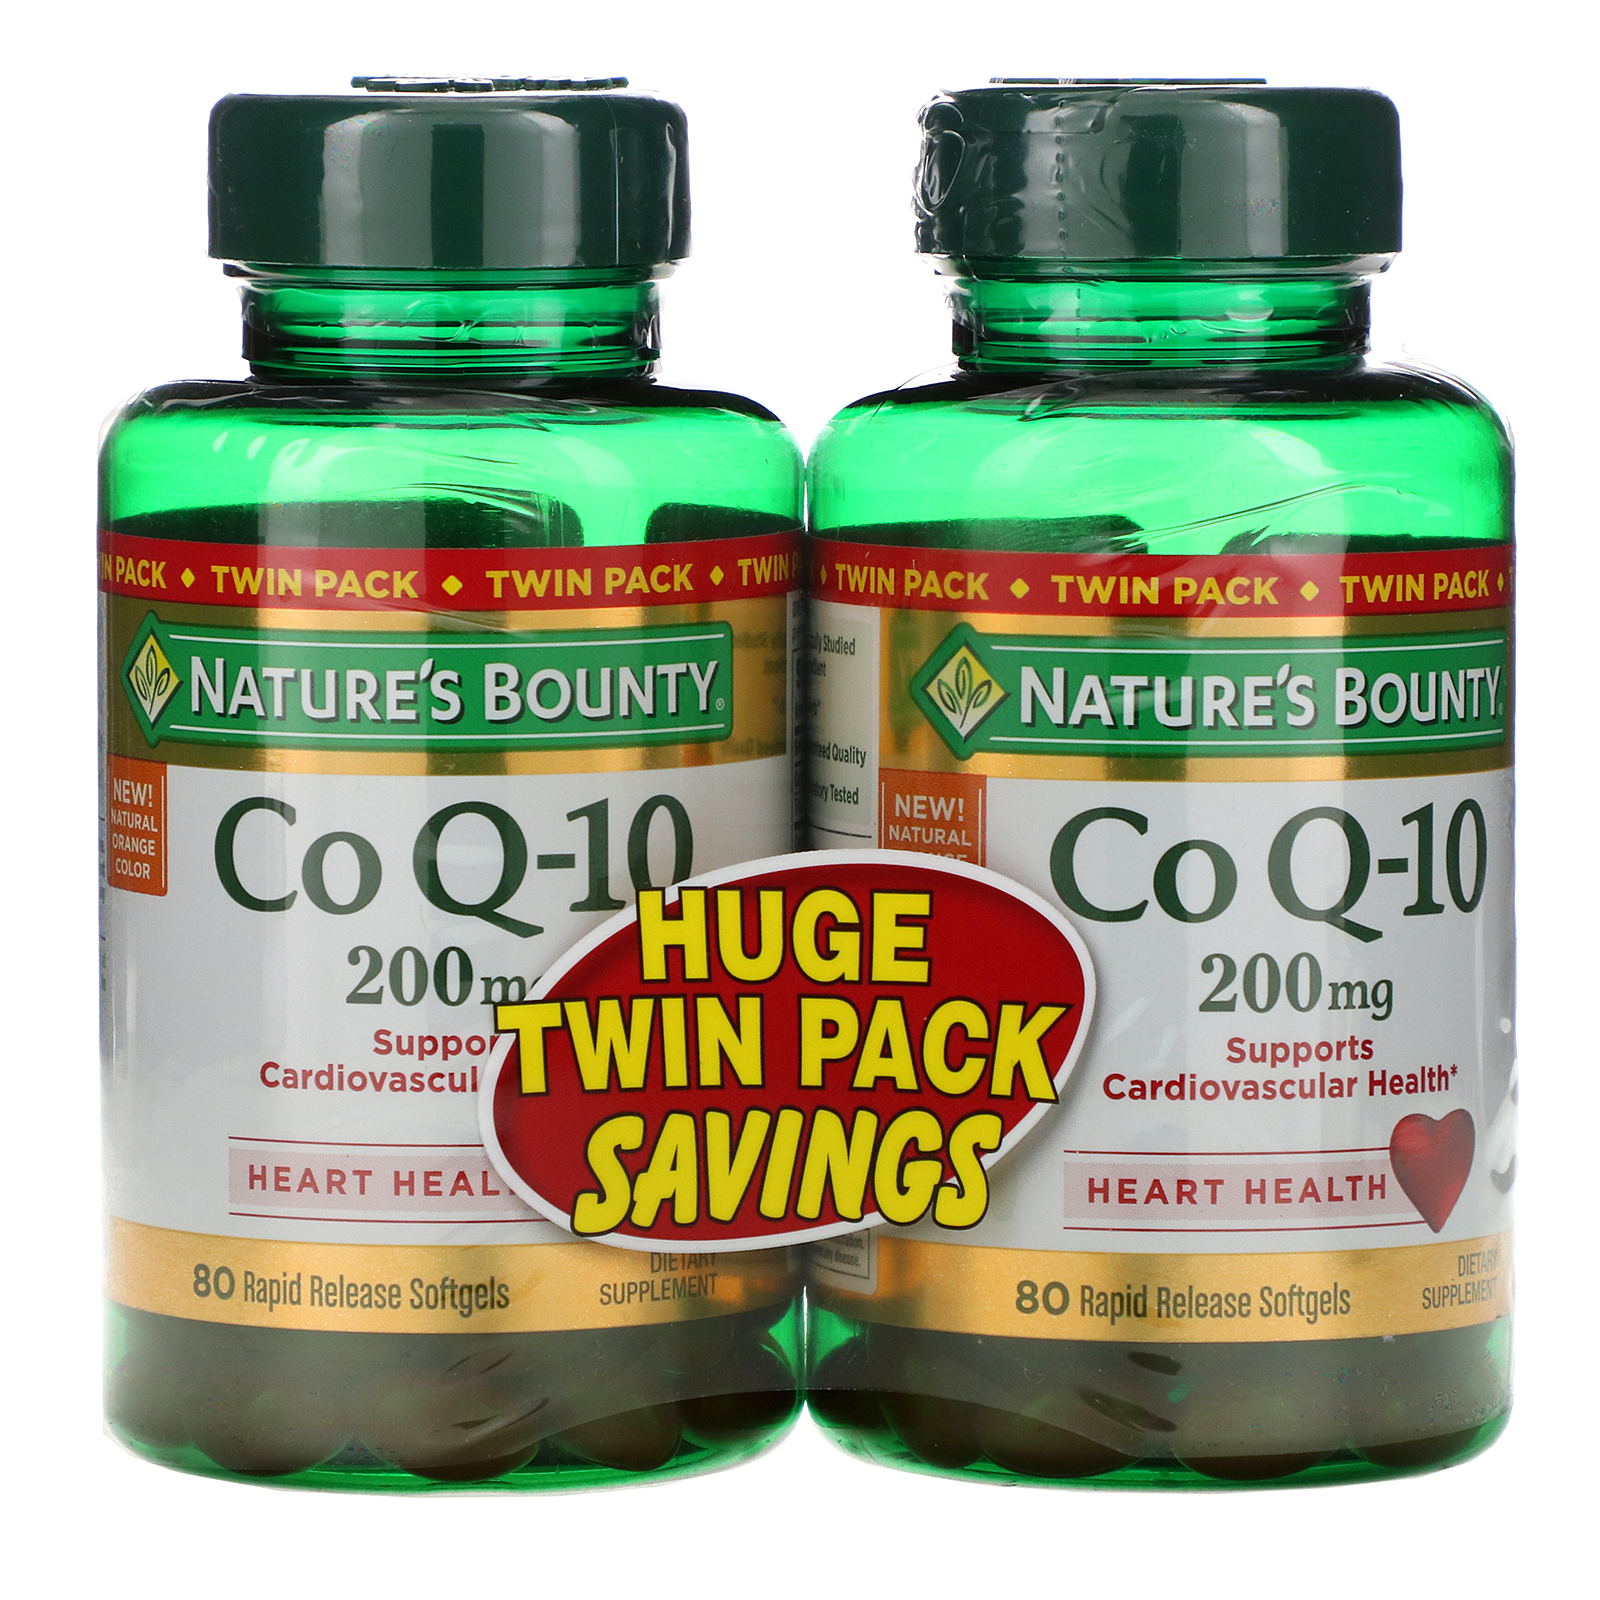 Nature's Bounty, Co Q-10, Twin Pack, 200 80 Rapid Release Softgels Each